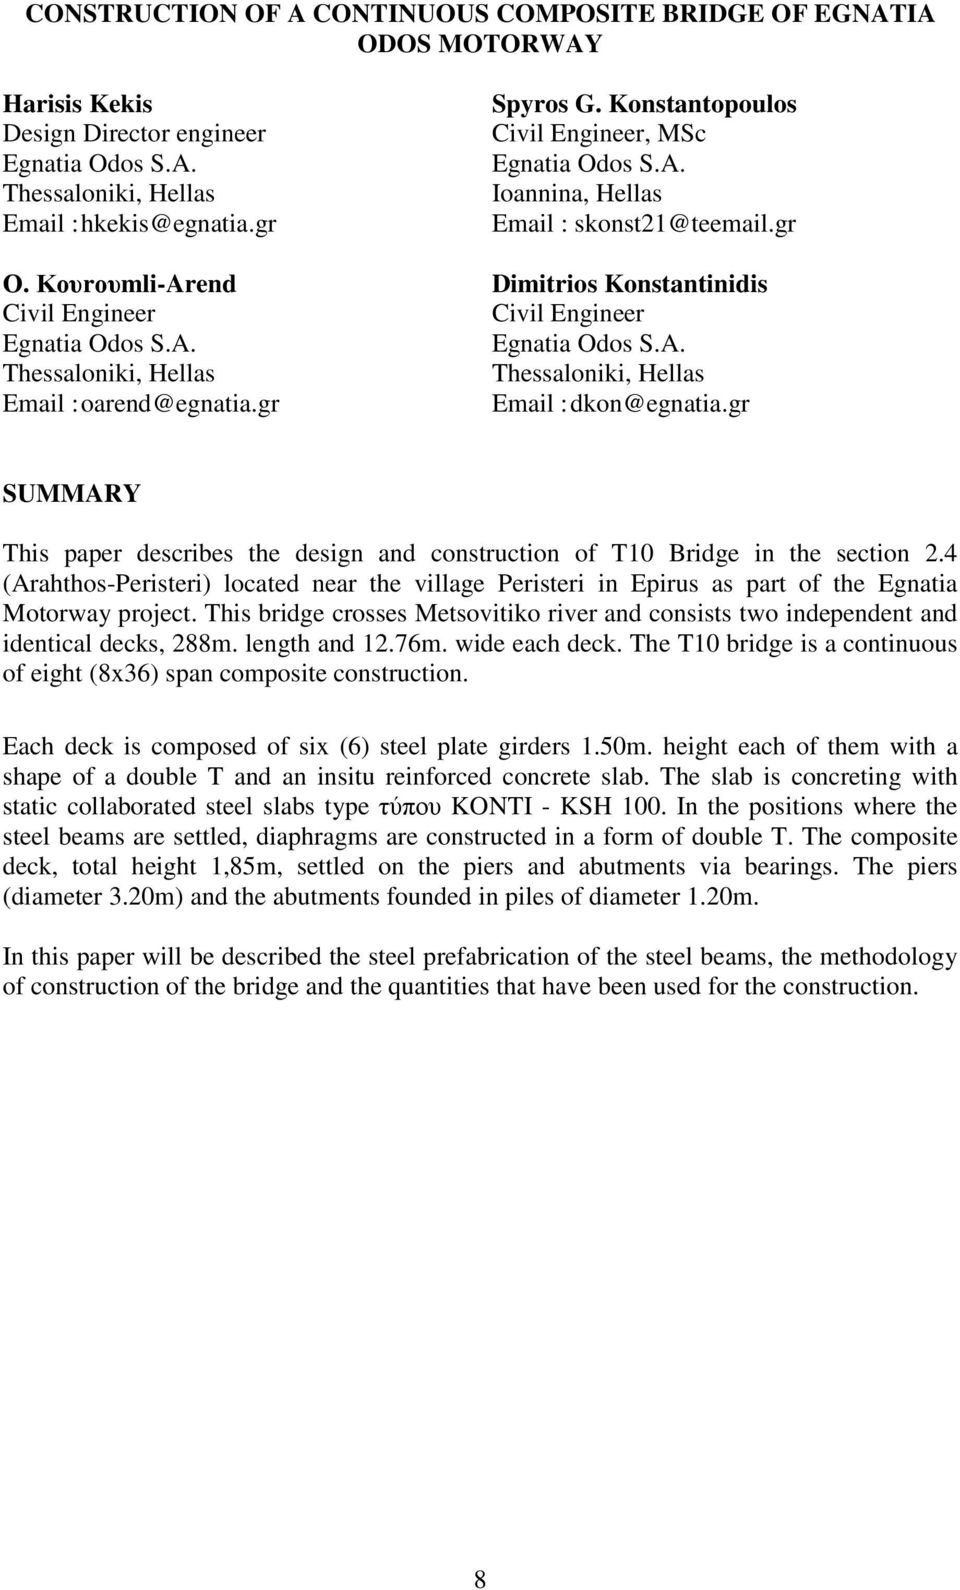 gr Dimitrios Konstantinidis Civil Engineer Egnatia Odos S.A. Thessaloniki, Hellas Email : dkon@egnatia.gr SUMMARY This paper describes the design and construction of T10 Bridge in the section 2.